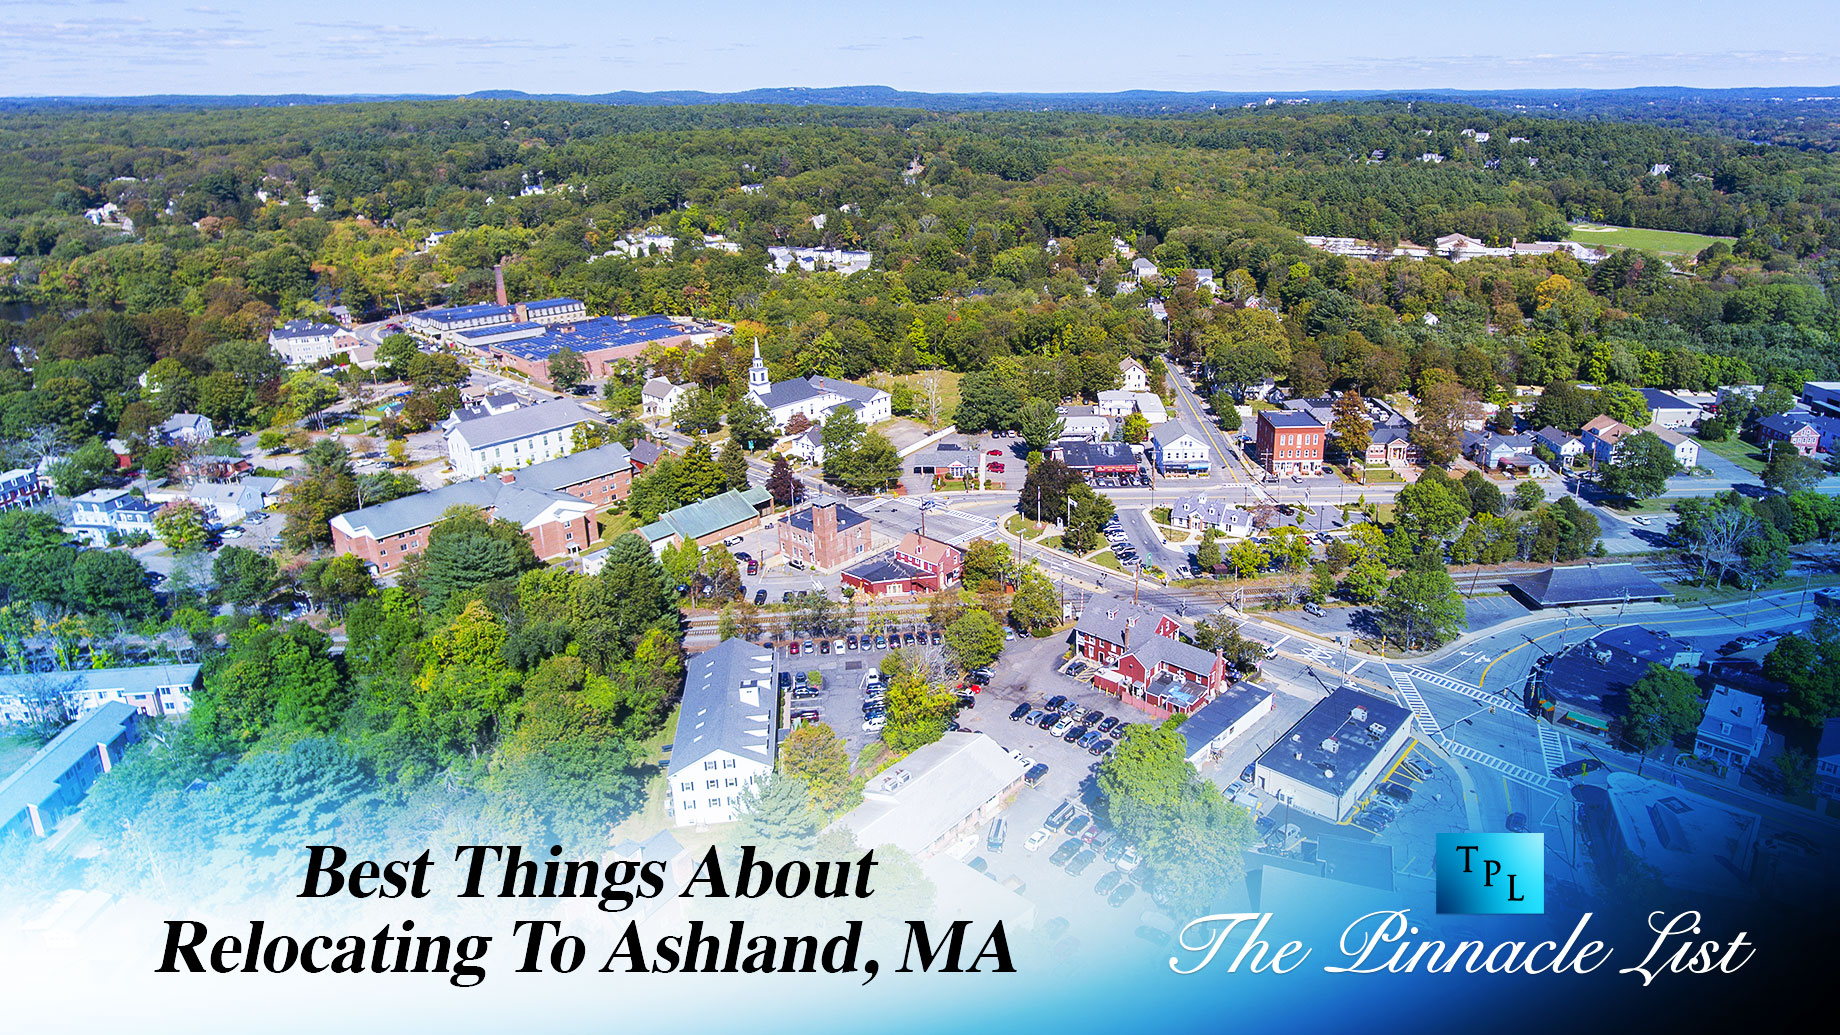 Best Things About Relocating To Ashland, MA